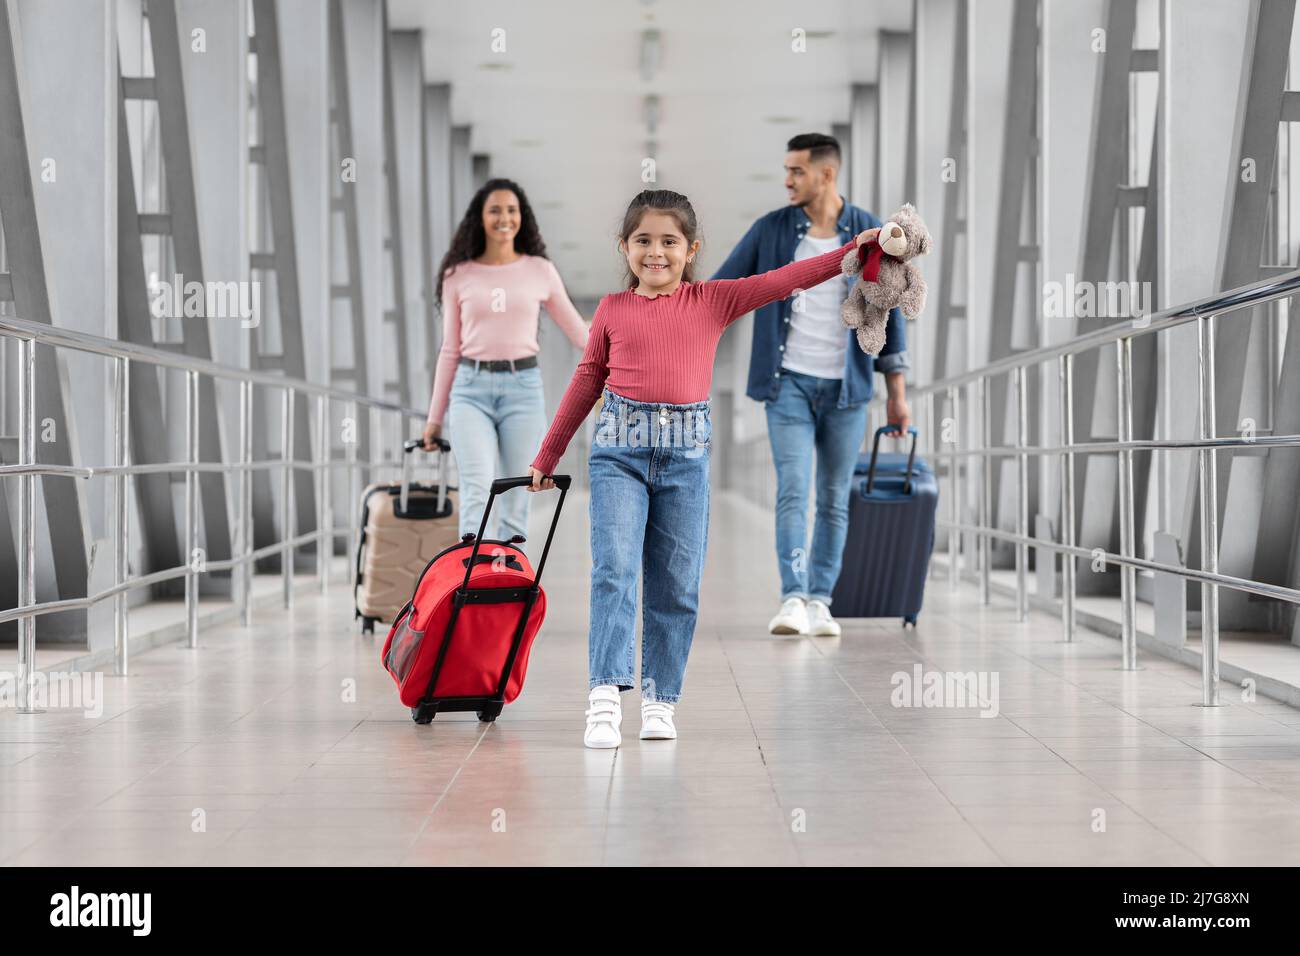 Family Journey. Little Girl Carrying Suitcase While Walking With Parents At Airport Stock Photo